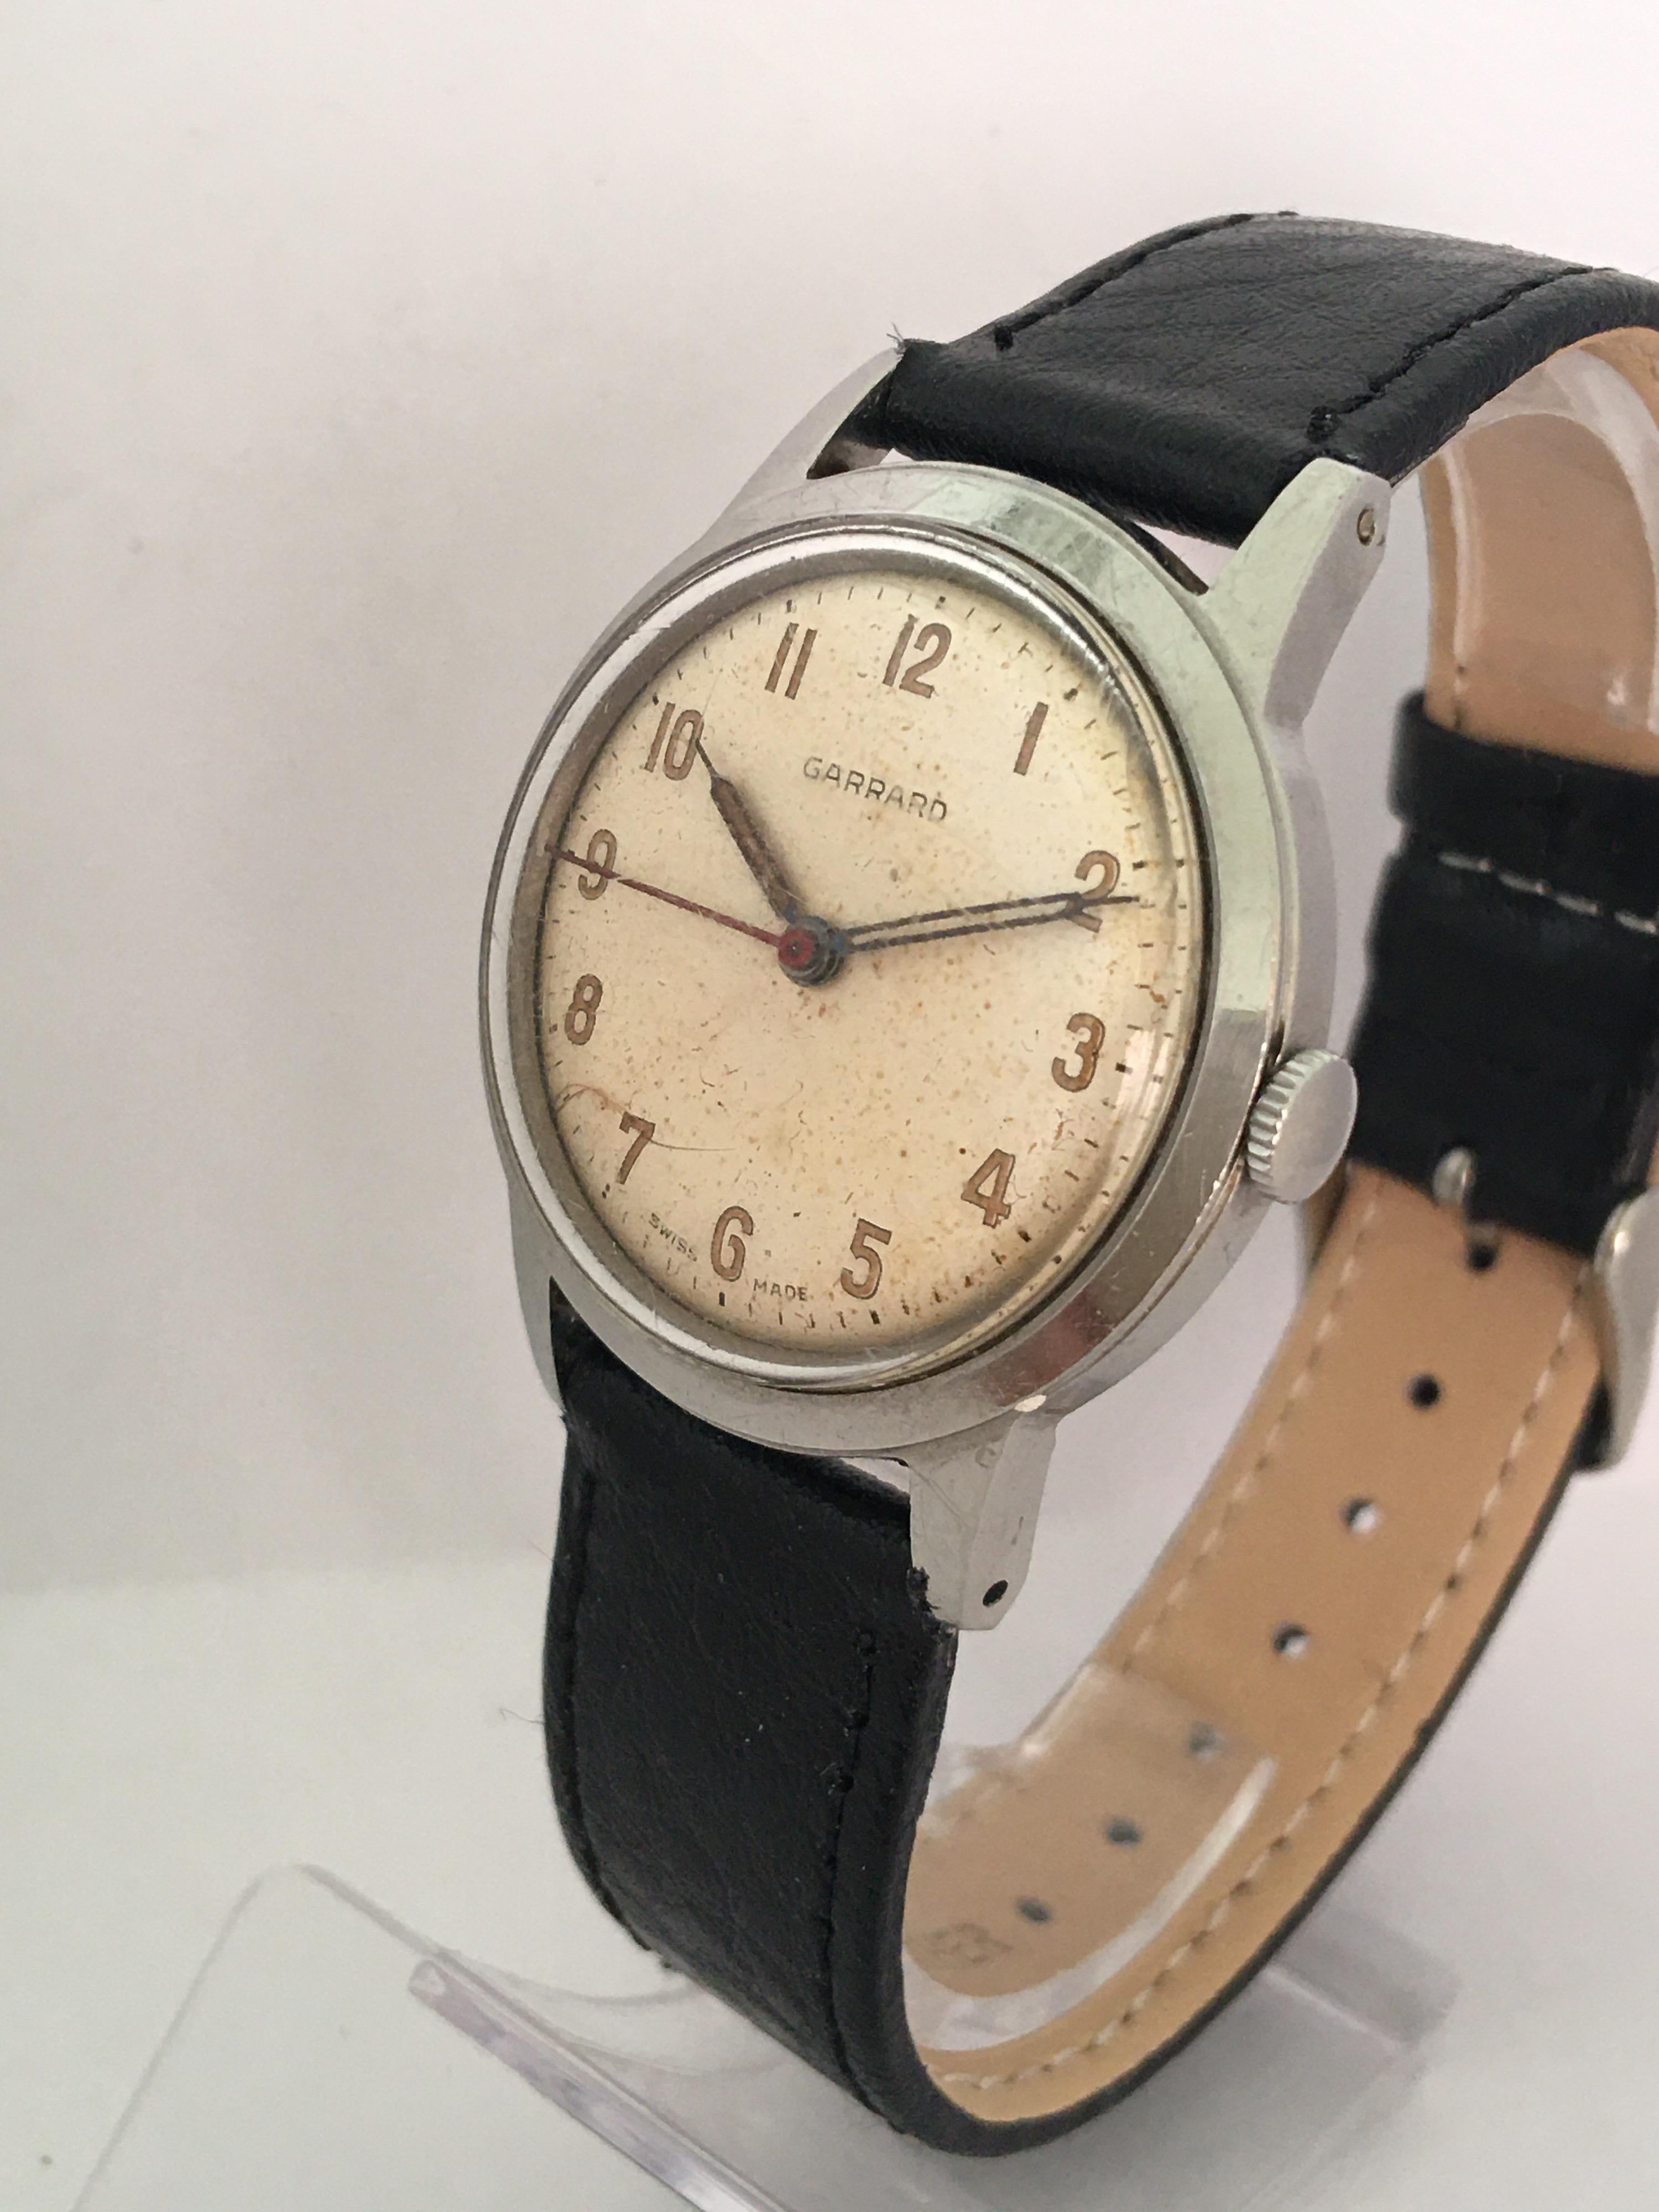 A Classic and beautiful example of a 1950’s Manual winding Watch. 

There is a 1961 inscription on the back of the watch, from Imperial Chemical Industries Ltd. although the inscription is dated 1961, we believe the watch was made some time in the